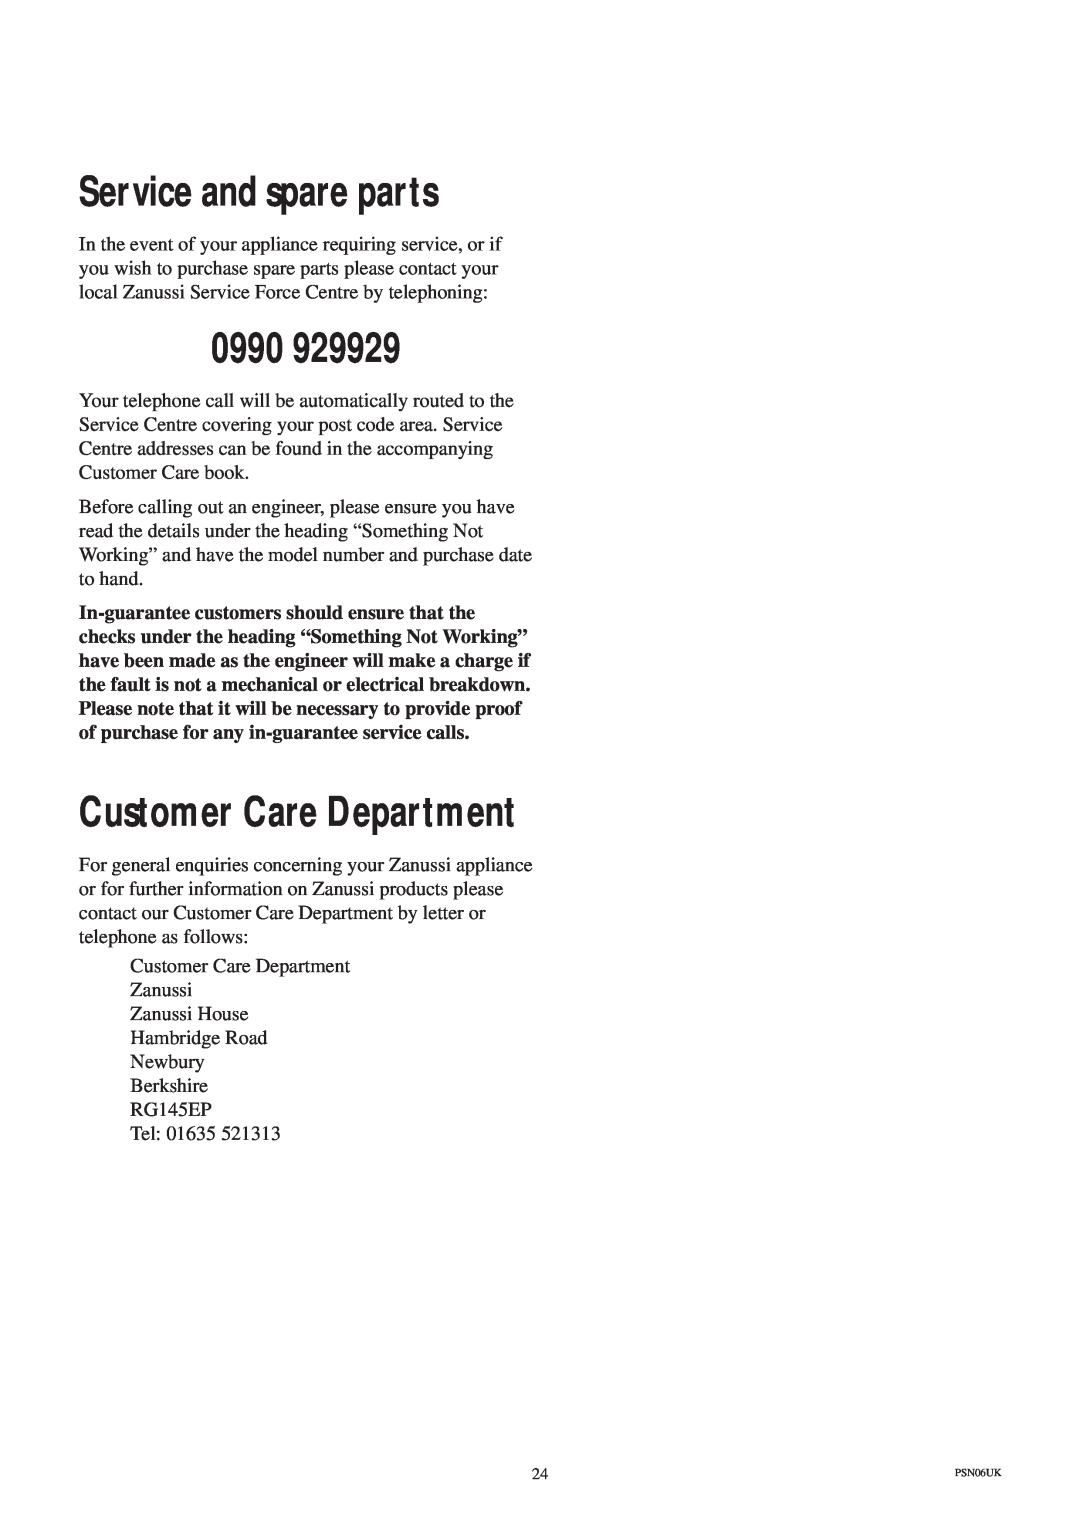 Zanussi ZDS 689 EX manual Service and spare parts, 0990, Customer Care Department 